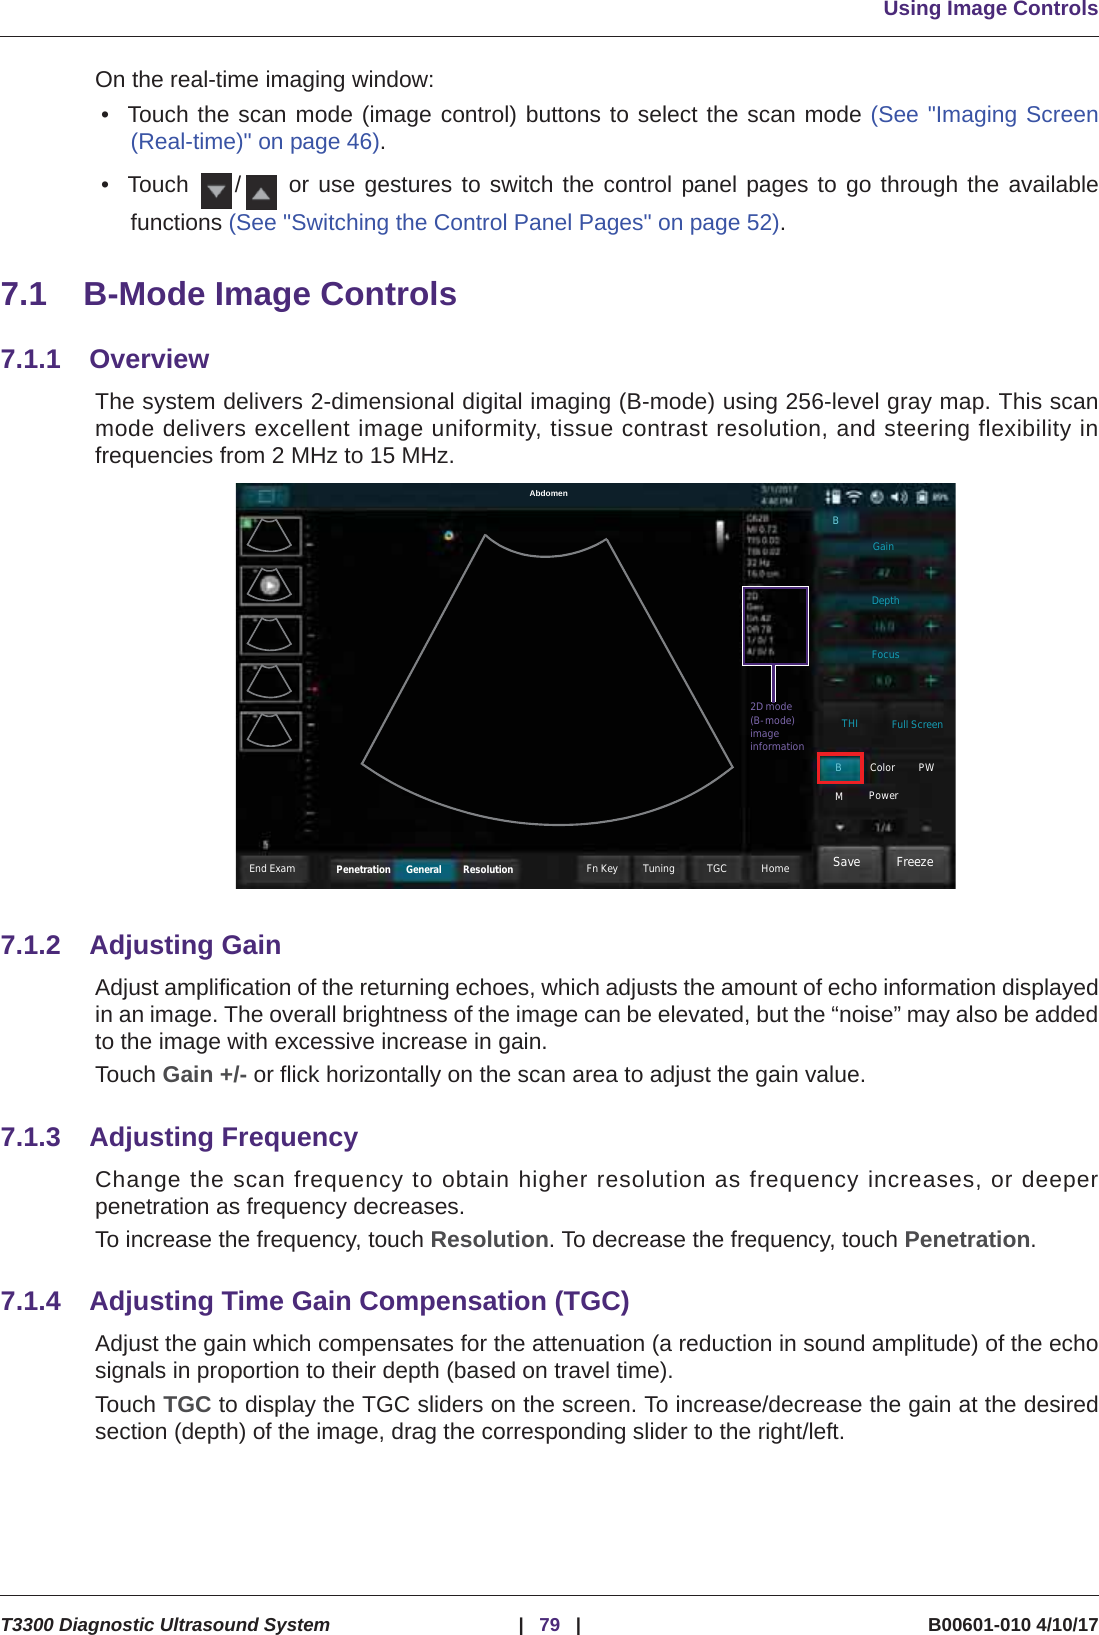 Using Image ControlsT3300 Diagnostic Ultrasound System |79 | B00601-010 4/10/17On the real-time imaging window:• Touch the scan mode (image control) buttons to select the scan mode (See &quot;Imaging Screen(Real-time)&quot; on page 46).• Touch  /  or use gestures to switch the control panel pages to go through the availablefunctions (See &quot;Switching the Control Panel Pages&quot; on page 52).7.1 B-Mode Image Controls7.1.1 OverviewThe system delivers 2-dimensional digital imaging (B-mode) using 256-level gray map. This scanmode delivers excellent image uniformity, tissue contrast resolution, and steering flexibility infrequencies from 2 MHz to 15 MHz. 7.1.2 Adjusting GainAdjust amplification of the returning echoes, which adjusts the amount of echo information displayedin an image. The overall brightness of the image can be elevated, but the “noise” may also be addedto the image with excessive increase in gain.Touch Gain +/- or flick horizontally on the scan area to adjust the gain value.7.1.3 Adjusting FrequencyChange the scan frequency to obtain higher resolution as frequency increases, or deeperpenetration as frequency decreases.To increase the frequency, touch Resolution. To decrease the frequency, touch Penetration.7.1.4 Adjusting Time Gain Compensation (TGC)Adjust the gain which compensates for the attenuation (a reduction in sound amplitude) of the echosignals in proportion to their depth (based on travel time).Touch TGC to display the TGC sliders on the screen. To increase/decrease the gain at the desiredsection (depth) of the image, drag the corresponding slider to the right/left.Save FreezeHomeTGCTuningResolutionGeneralPenetrationEnd ExamAbdomenGainDepthFocusTHI Full ScreenBColor PWMPowerB2D mode(B-mode)imageinformationFn Key